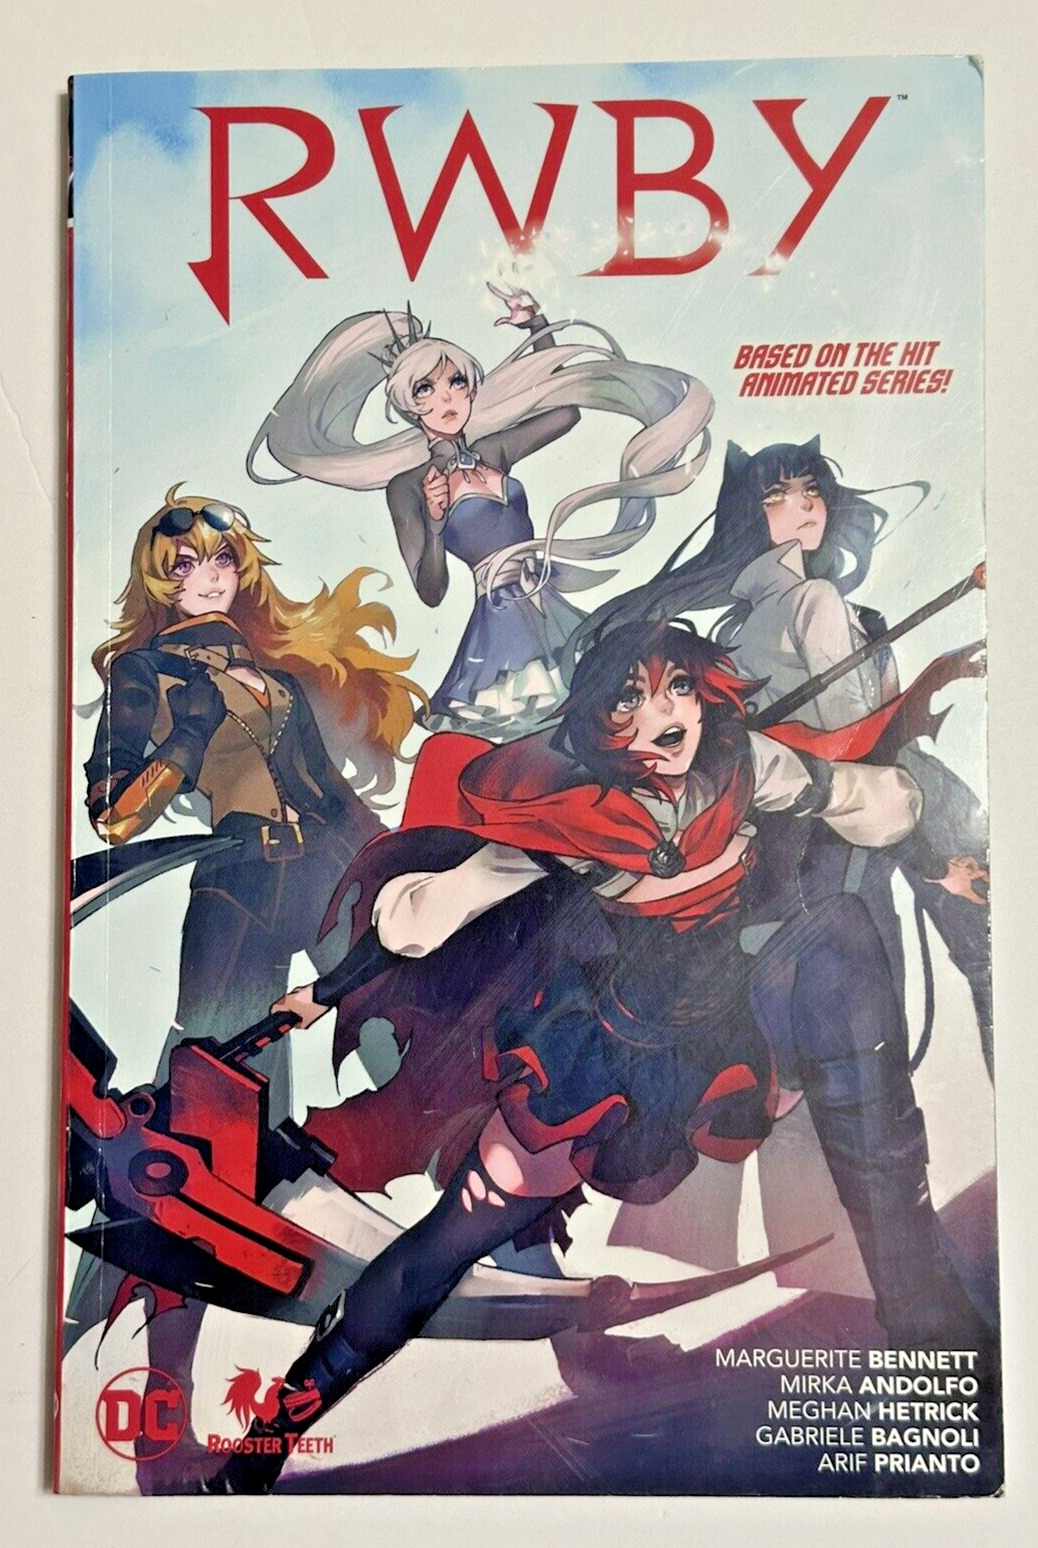 DC RWBY Volume 1 Comic Book Rooster Teeth Graphic Novel